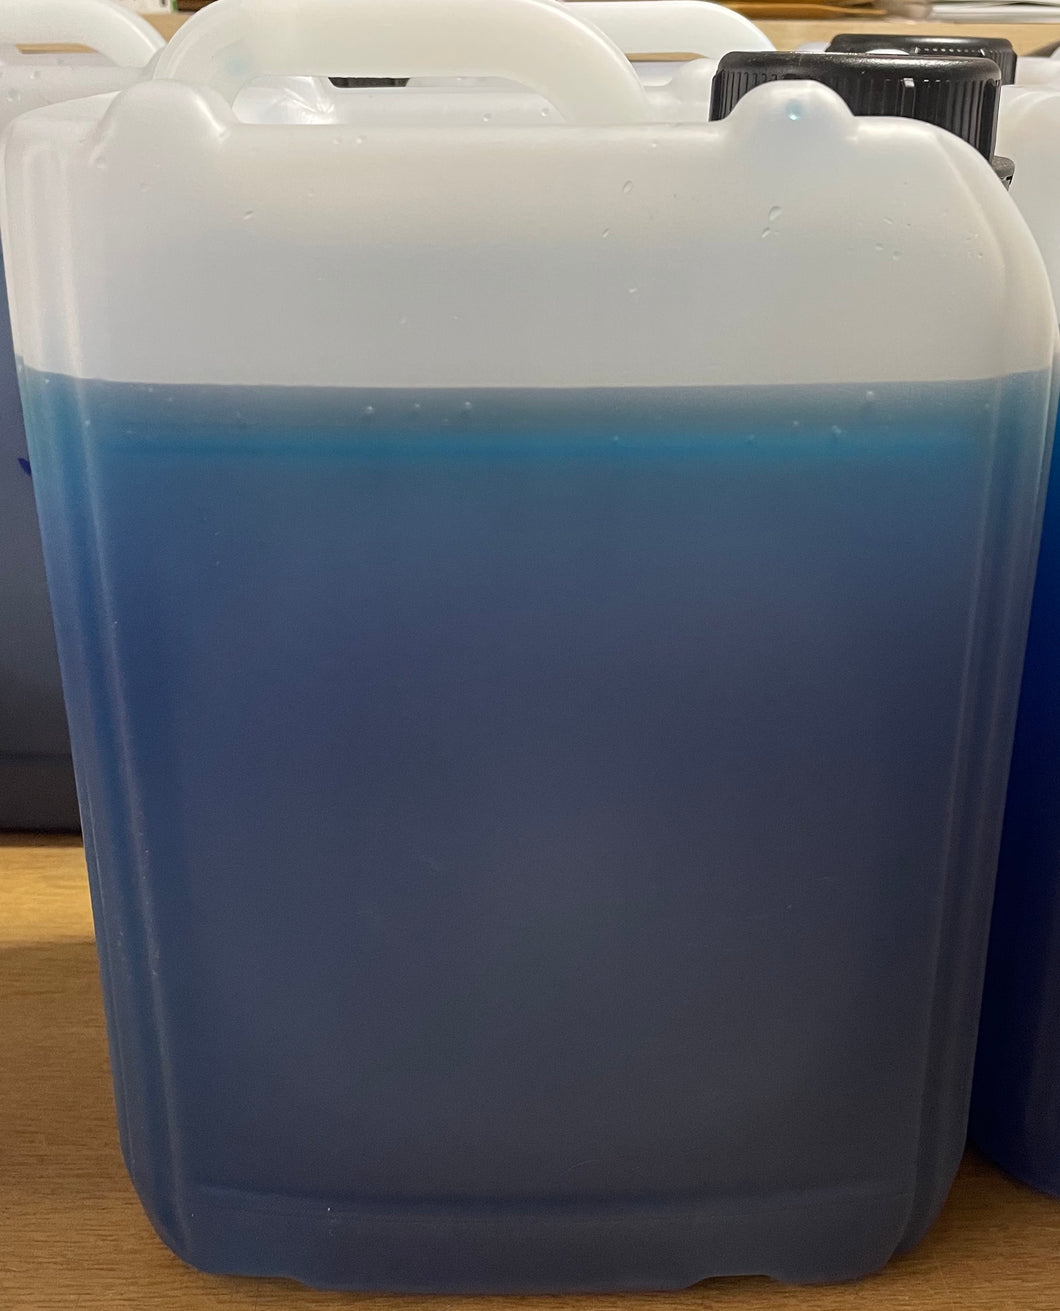 Bright Acid Copper Tank Plating Solution / electro forming 1 litre shipping uk only